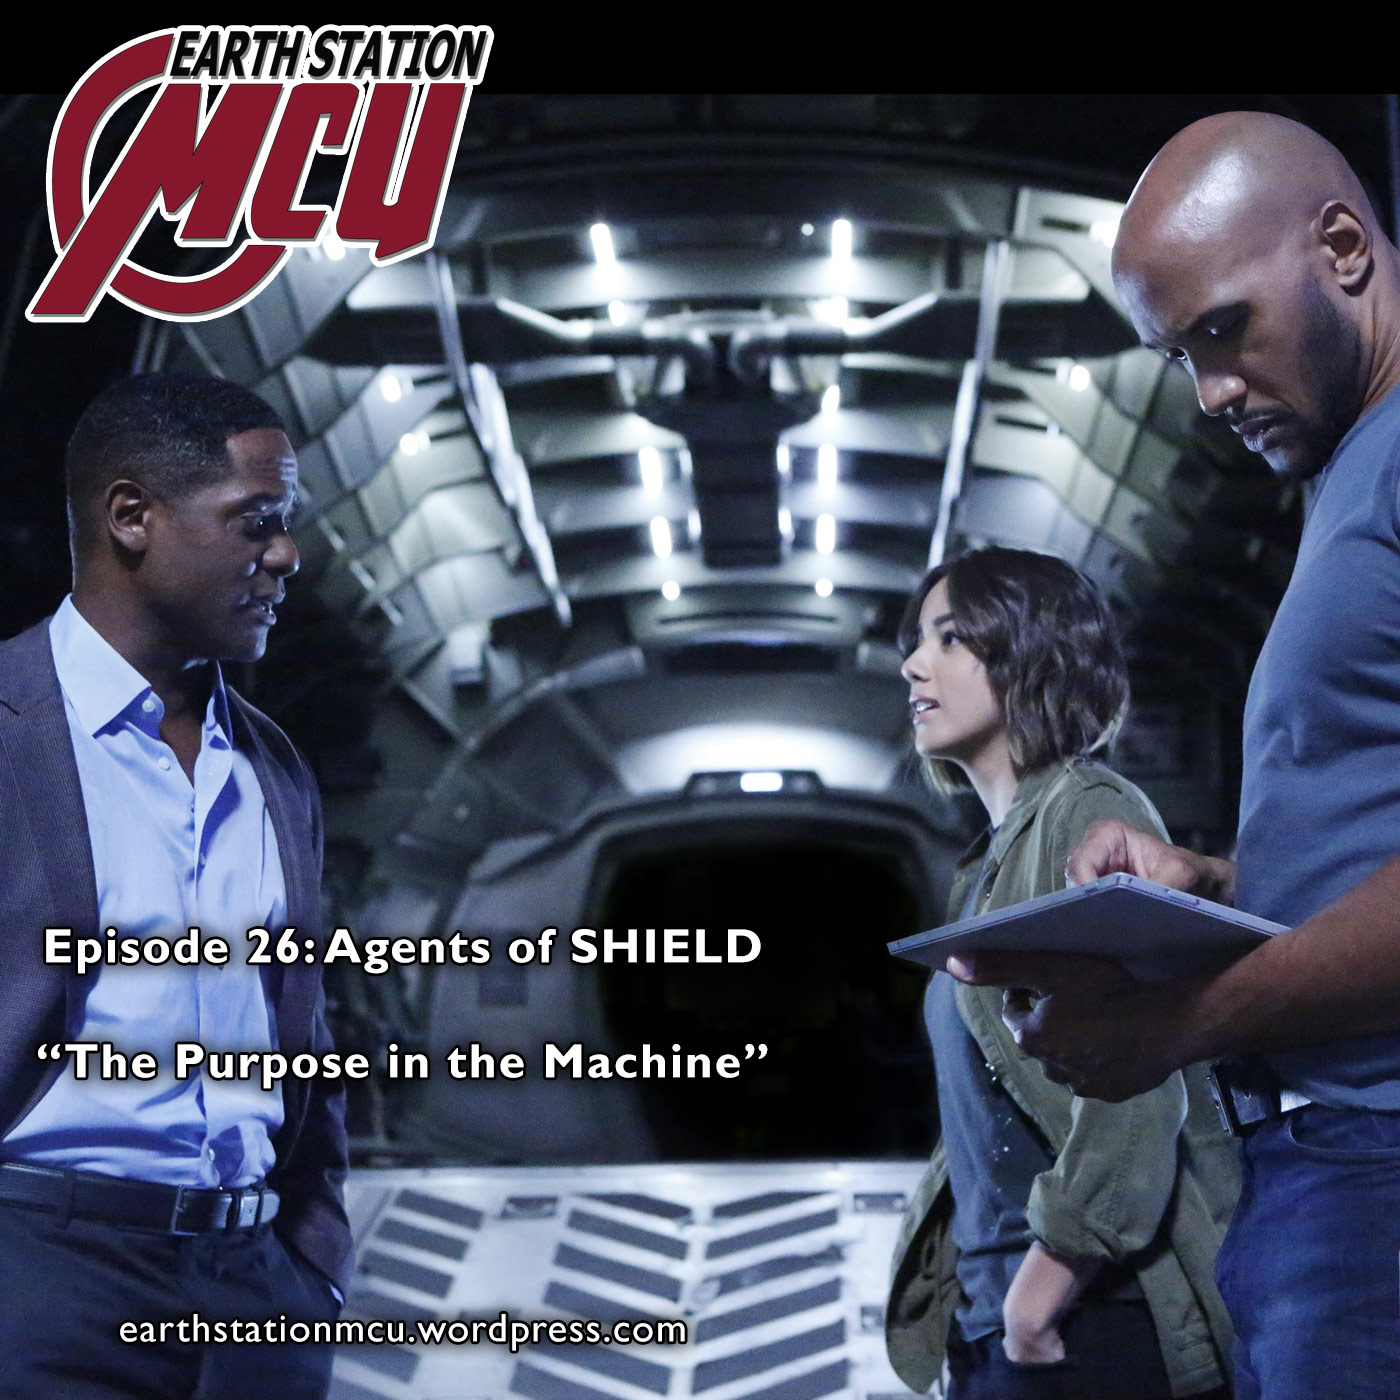 Earth Station MCU - Episode 26: Agents of SHIELD ”The Purpose in the Machine”